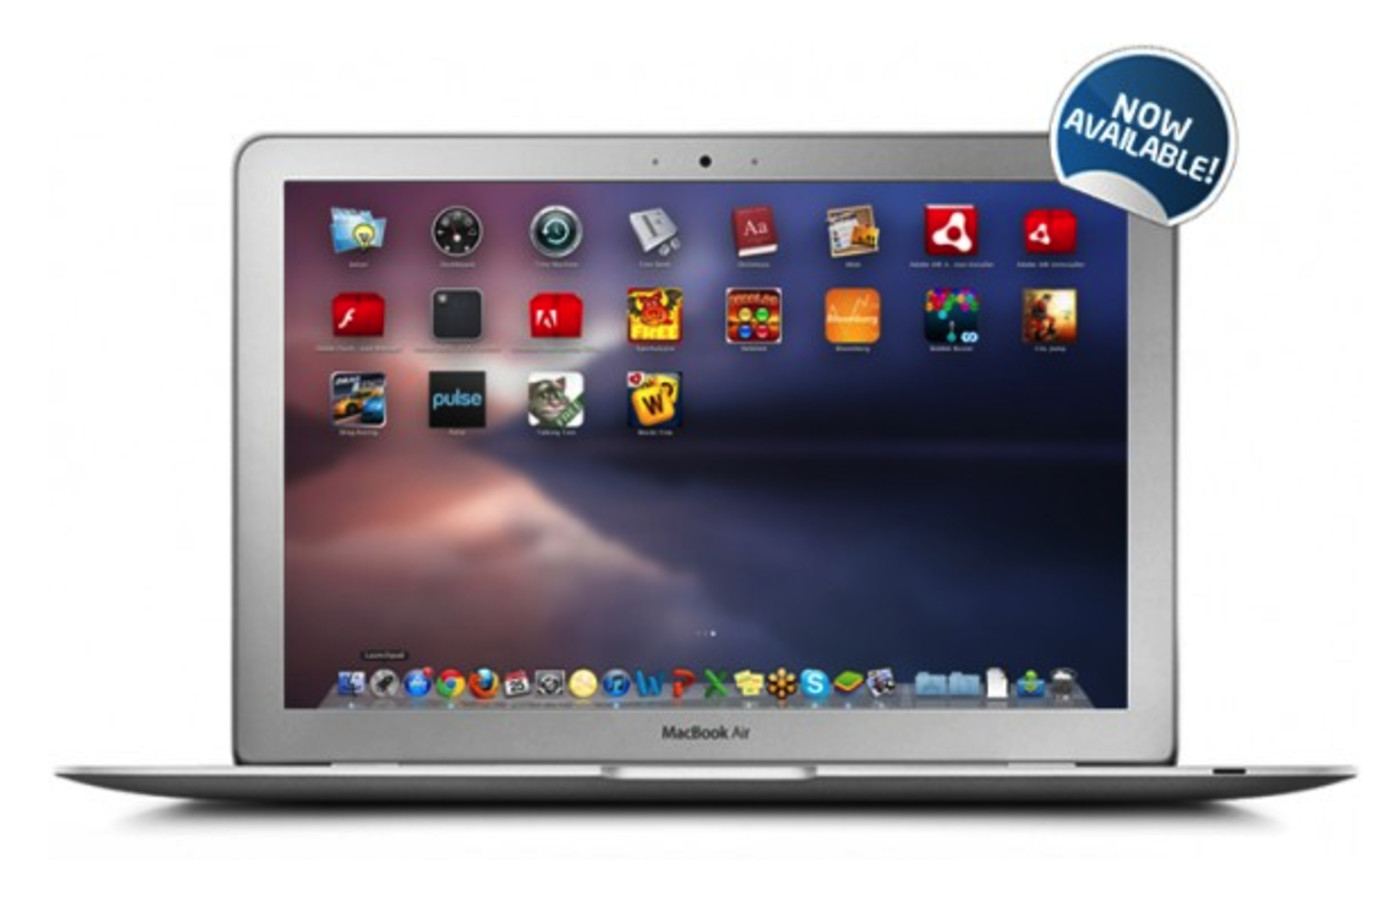 Run android apps natively on macbook